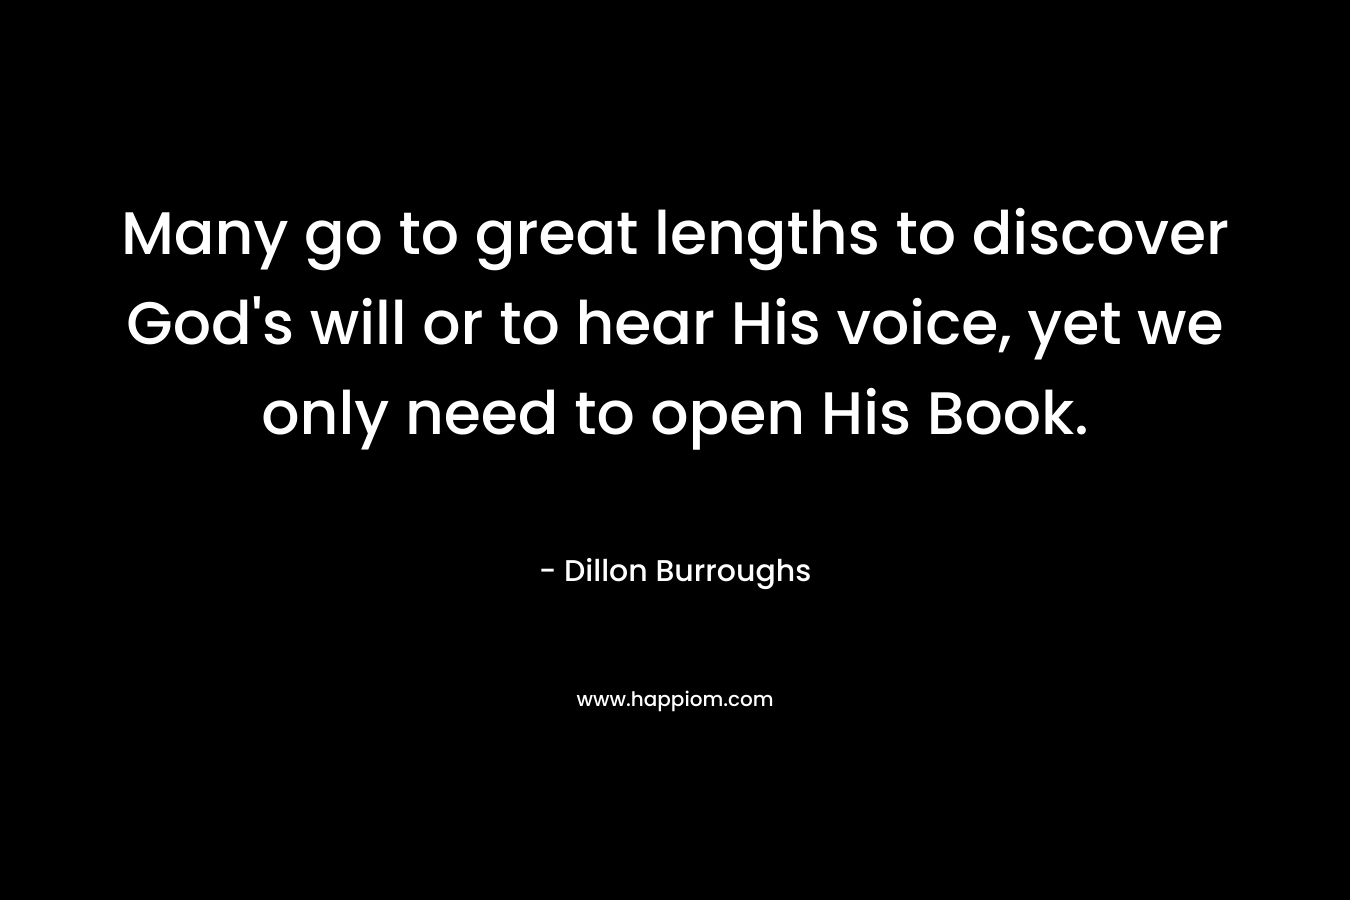 Many go to great lengths to discover God's will or to hear His voice, yet we only need to open His Book.